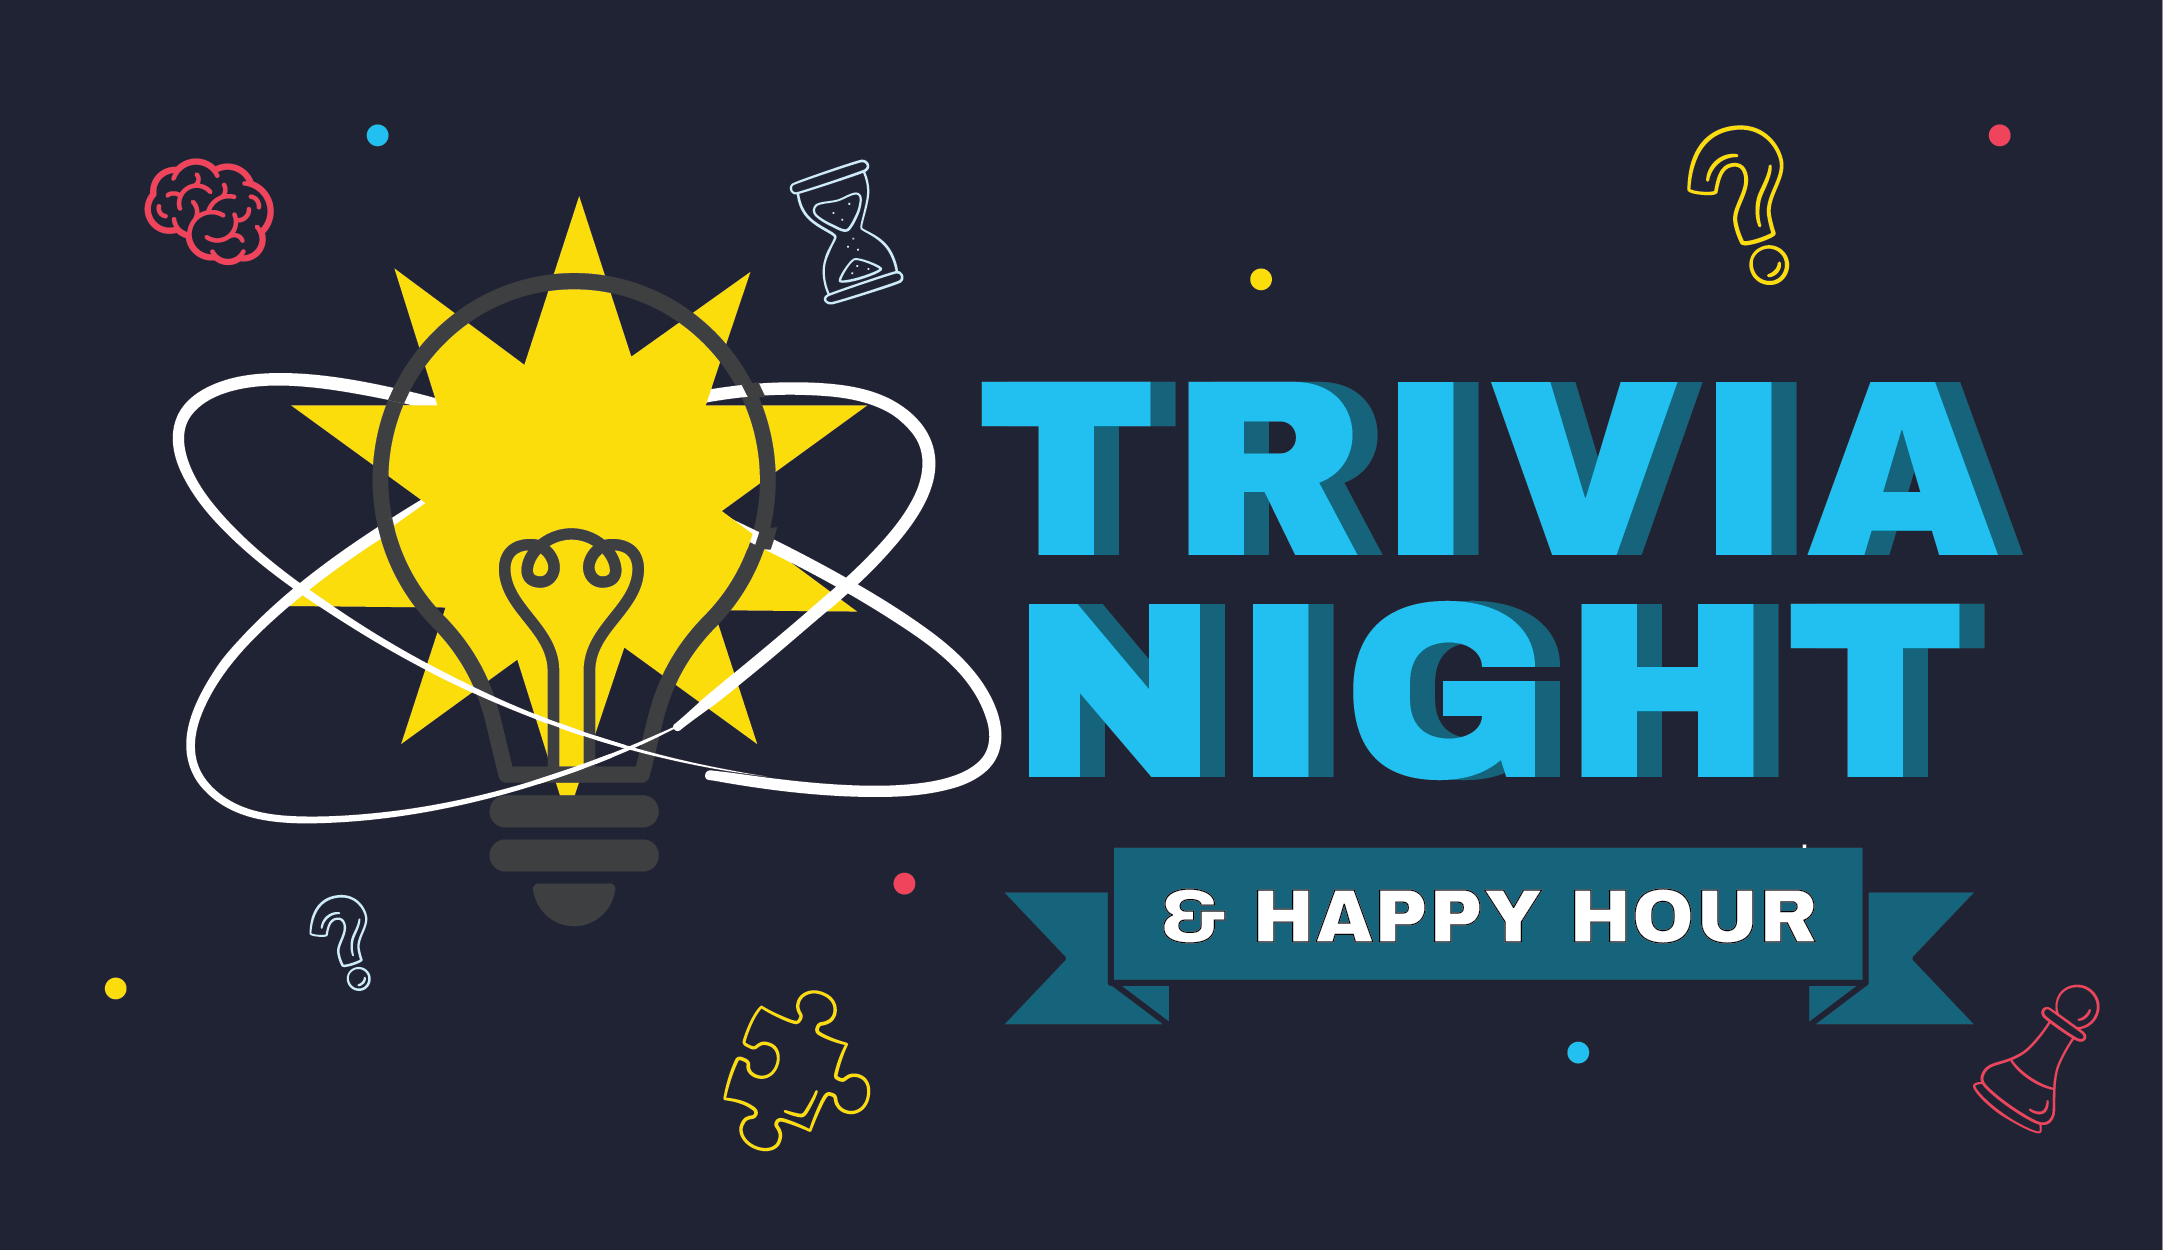 Trivia night and happy hour